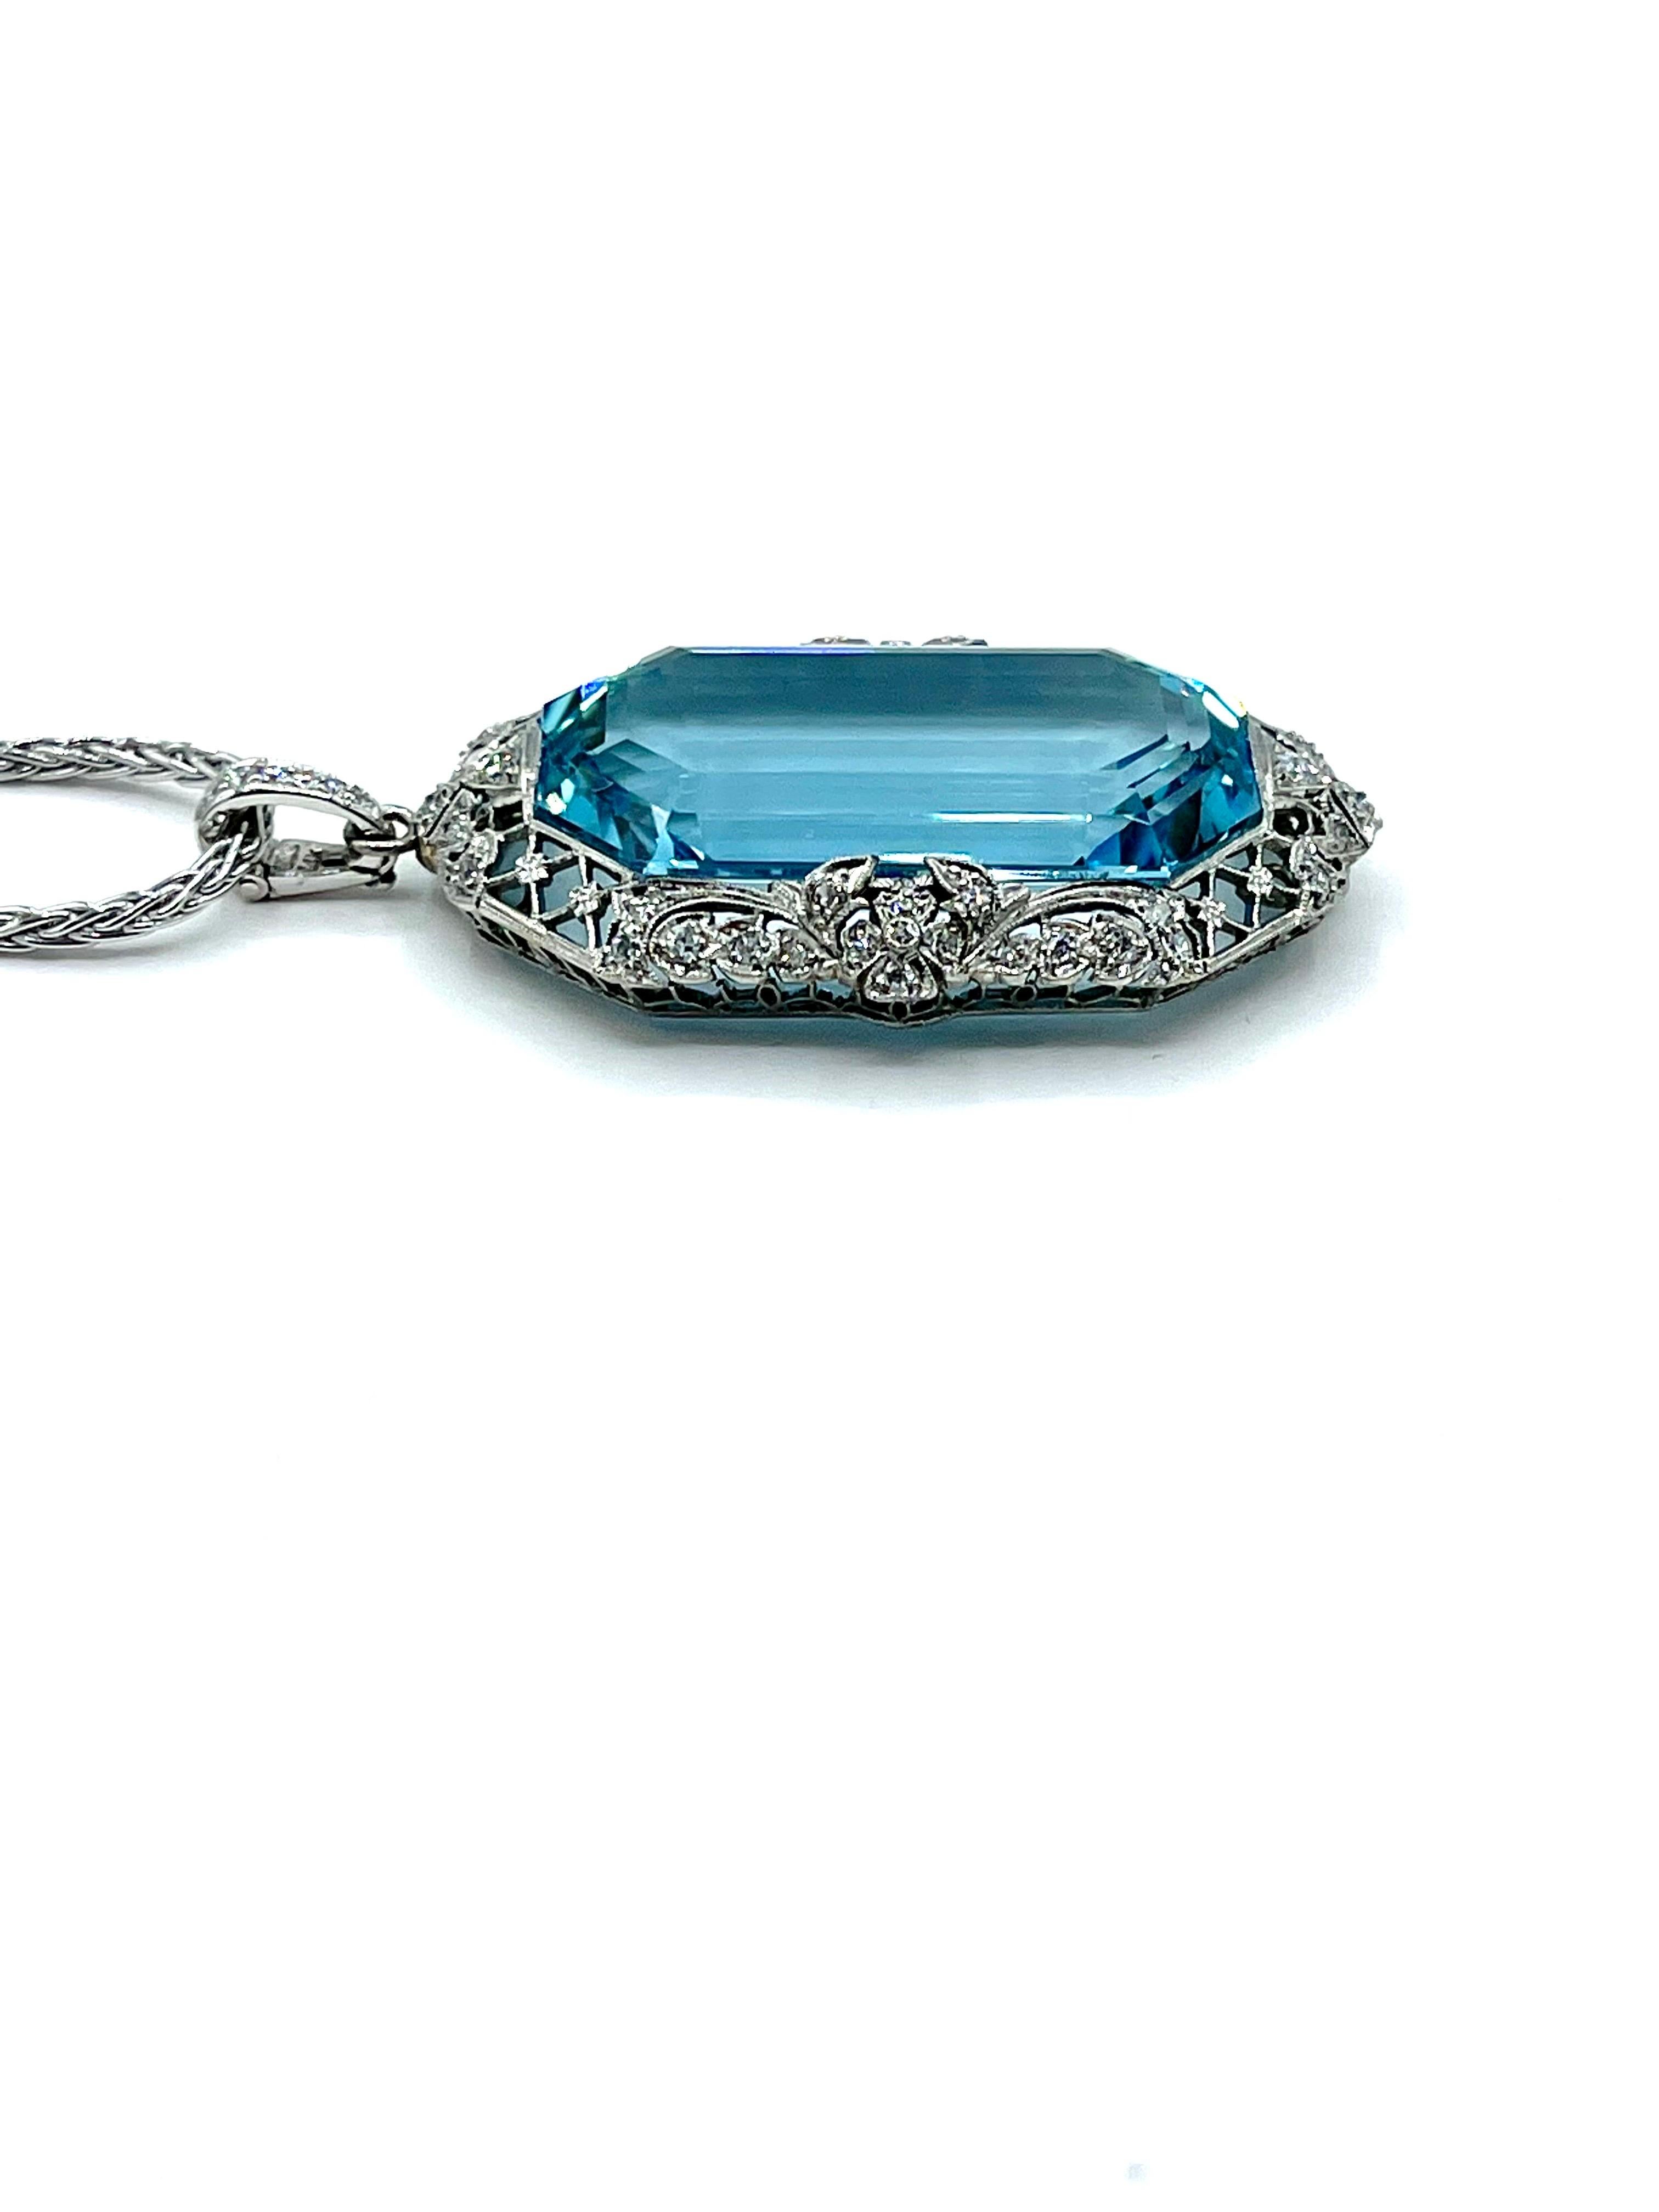 Art Deco 51.88ct Emerald Cut Aquamarine and Diamond Platinum Pendant In Excellent Condition For Sale In Chevy Chase, MD